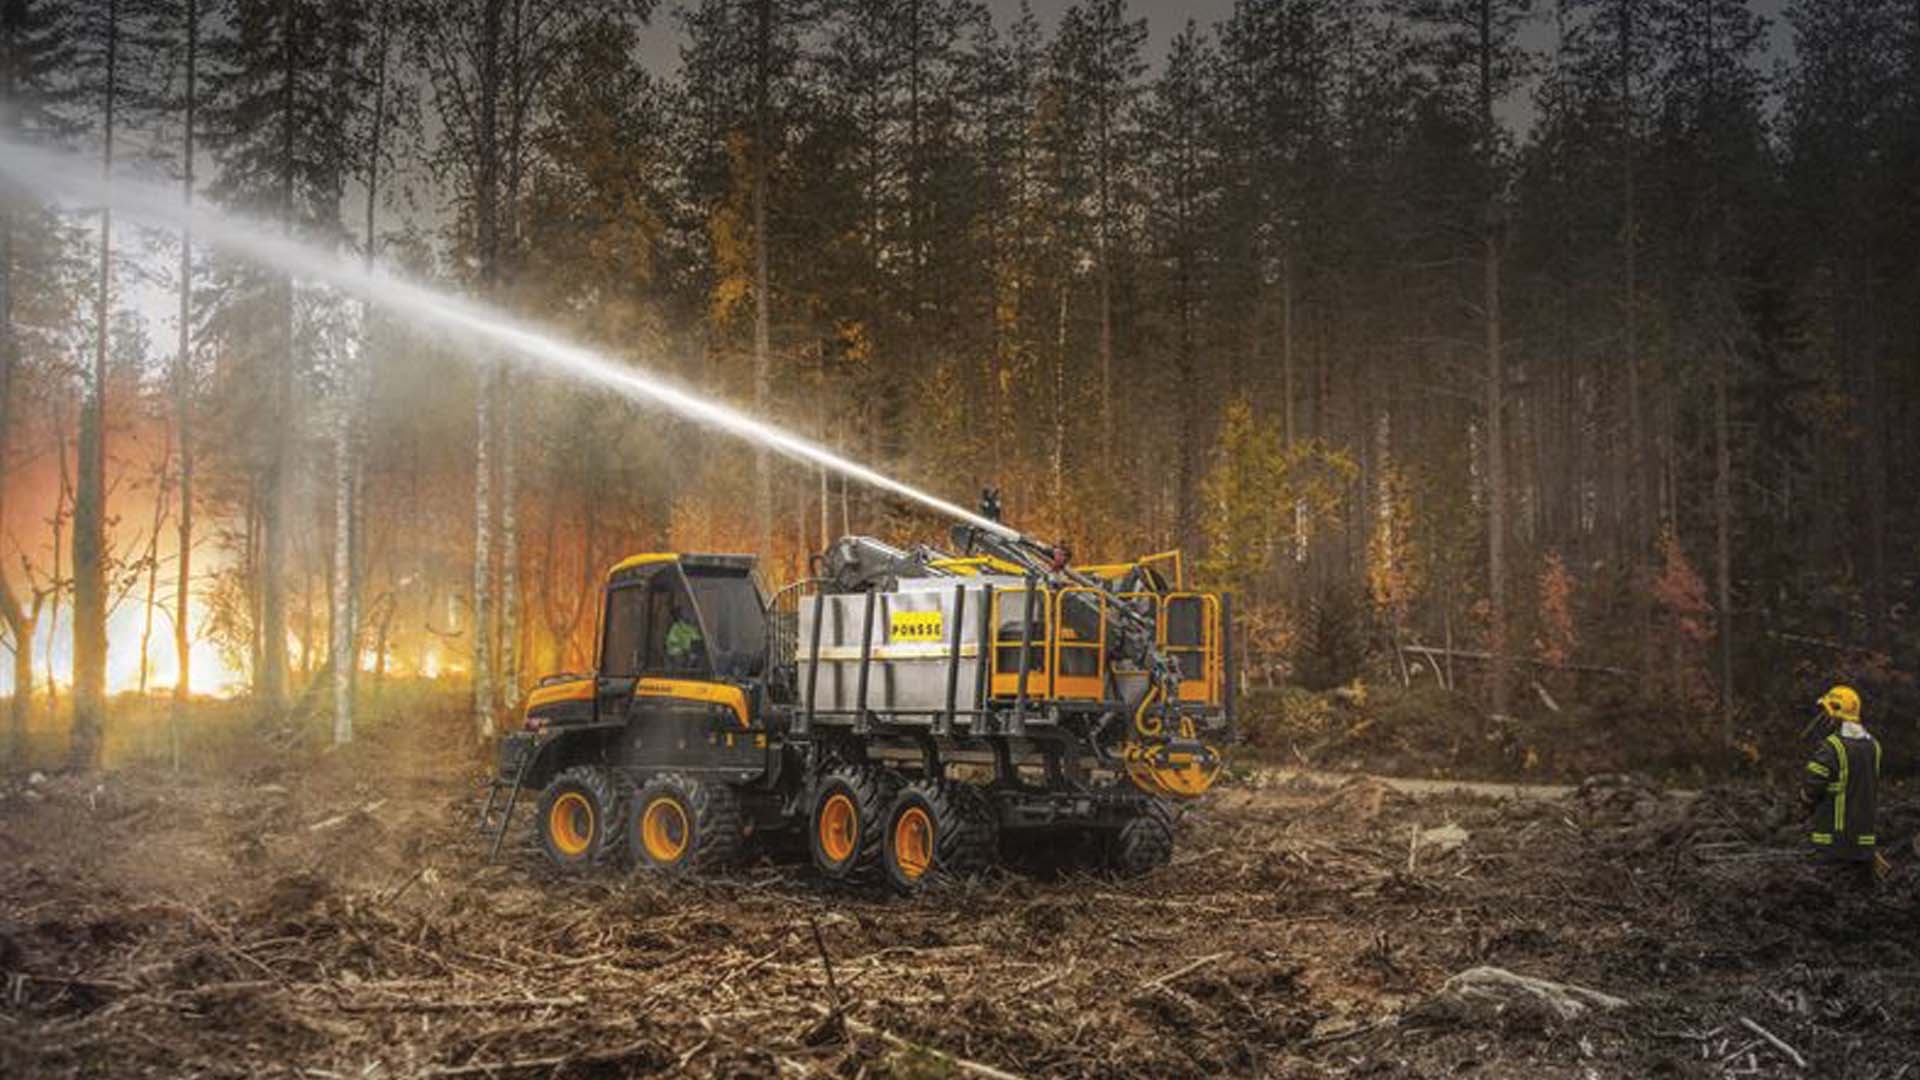 Ponsse's Forwarder is equipped with firefighting equipment